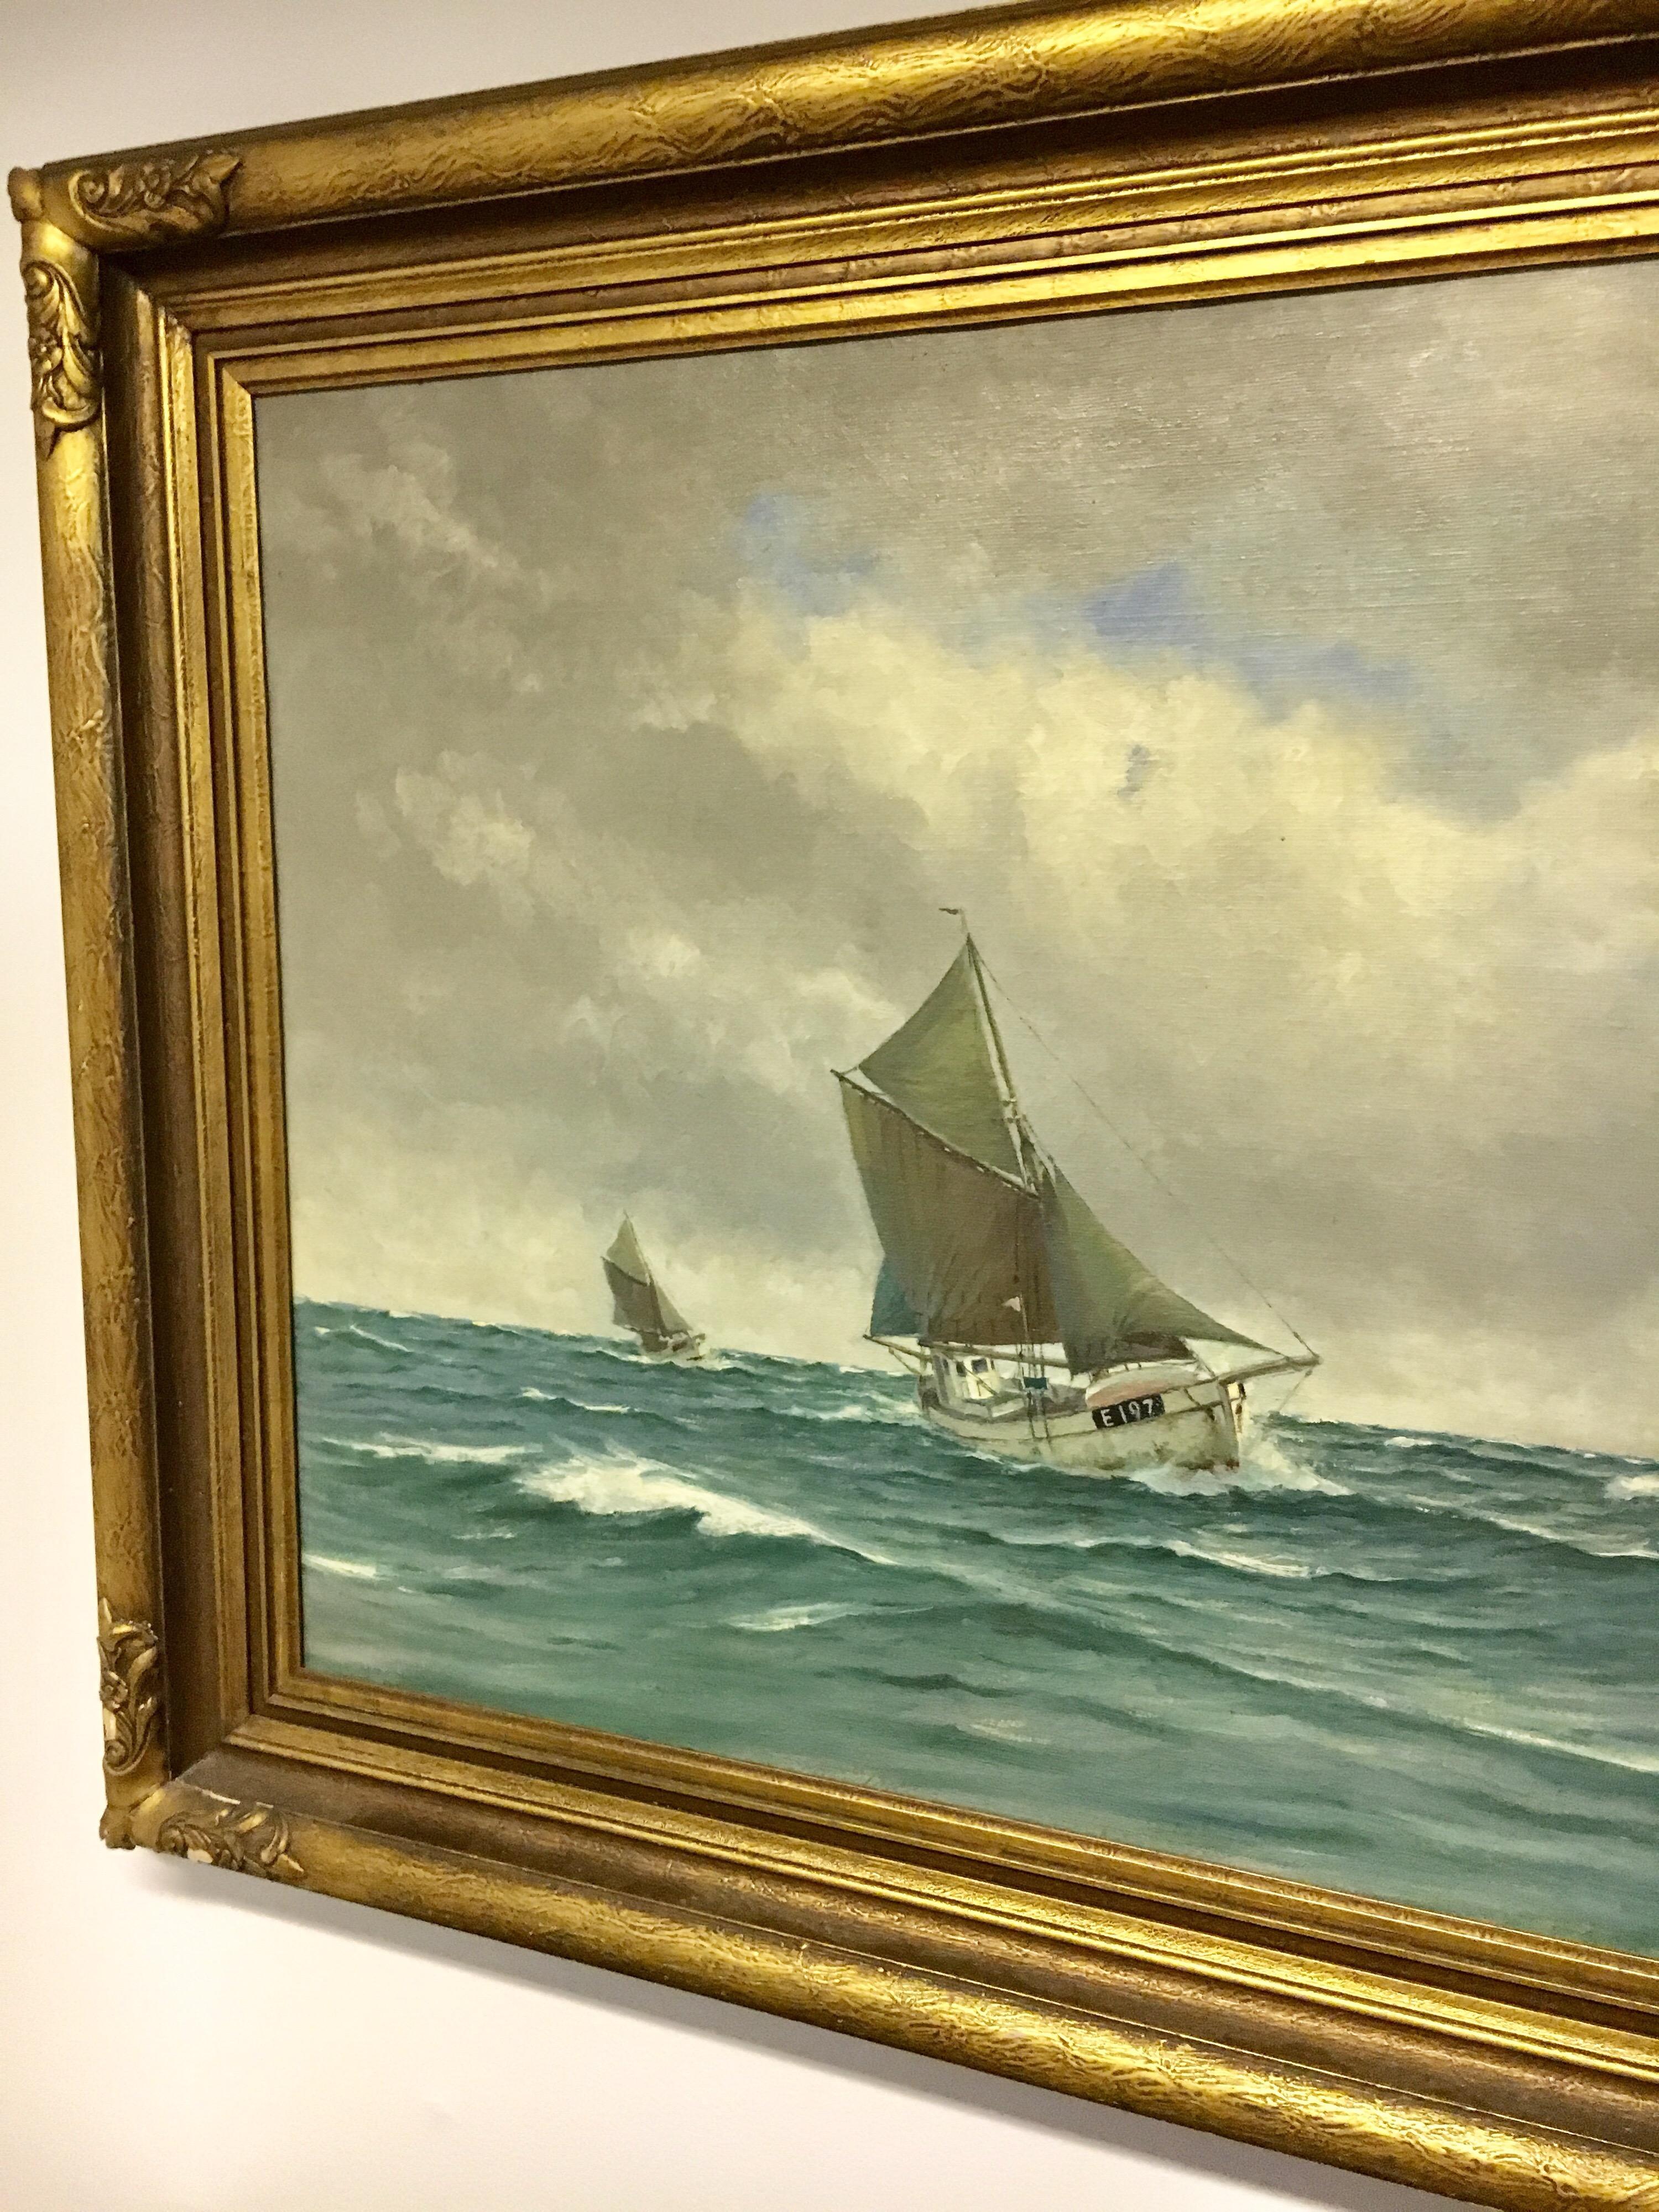 Wonderful large oil painting of sail ships by well-known Danish Marine painter Lauritz Sorensen (b.1882-d.1968) Sorensen was known for his dedication to the sea and his study of maritime objects, particularly sailing ships such as these. The spray